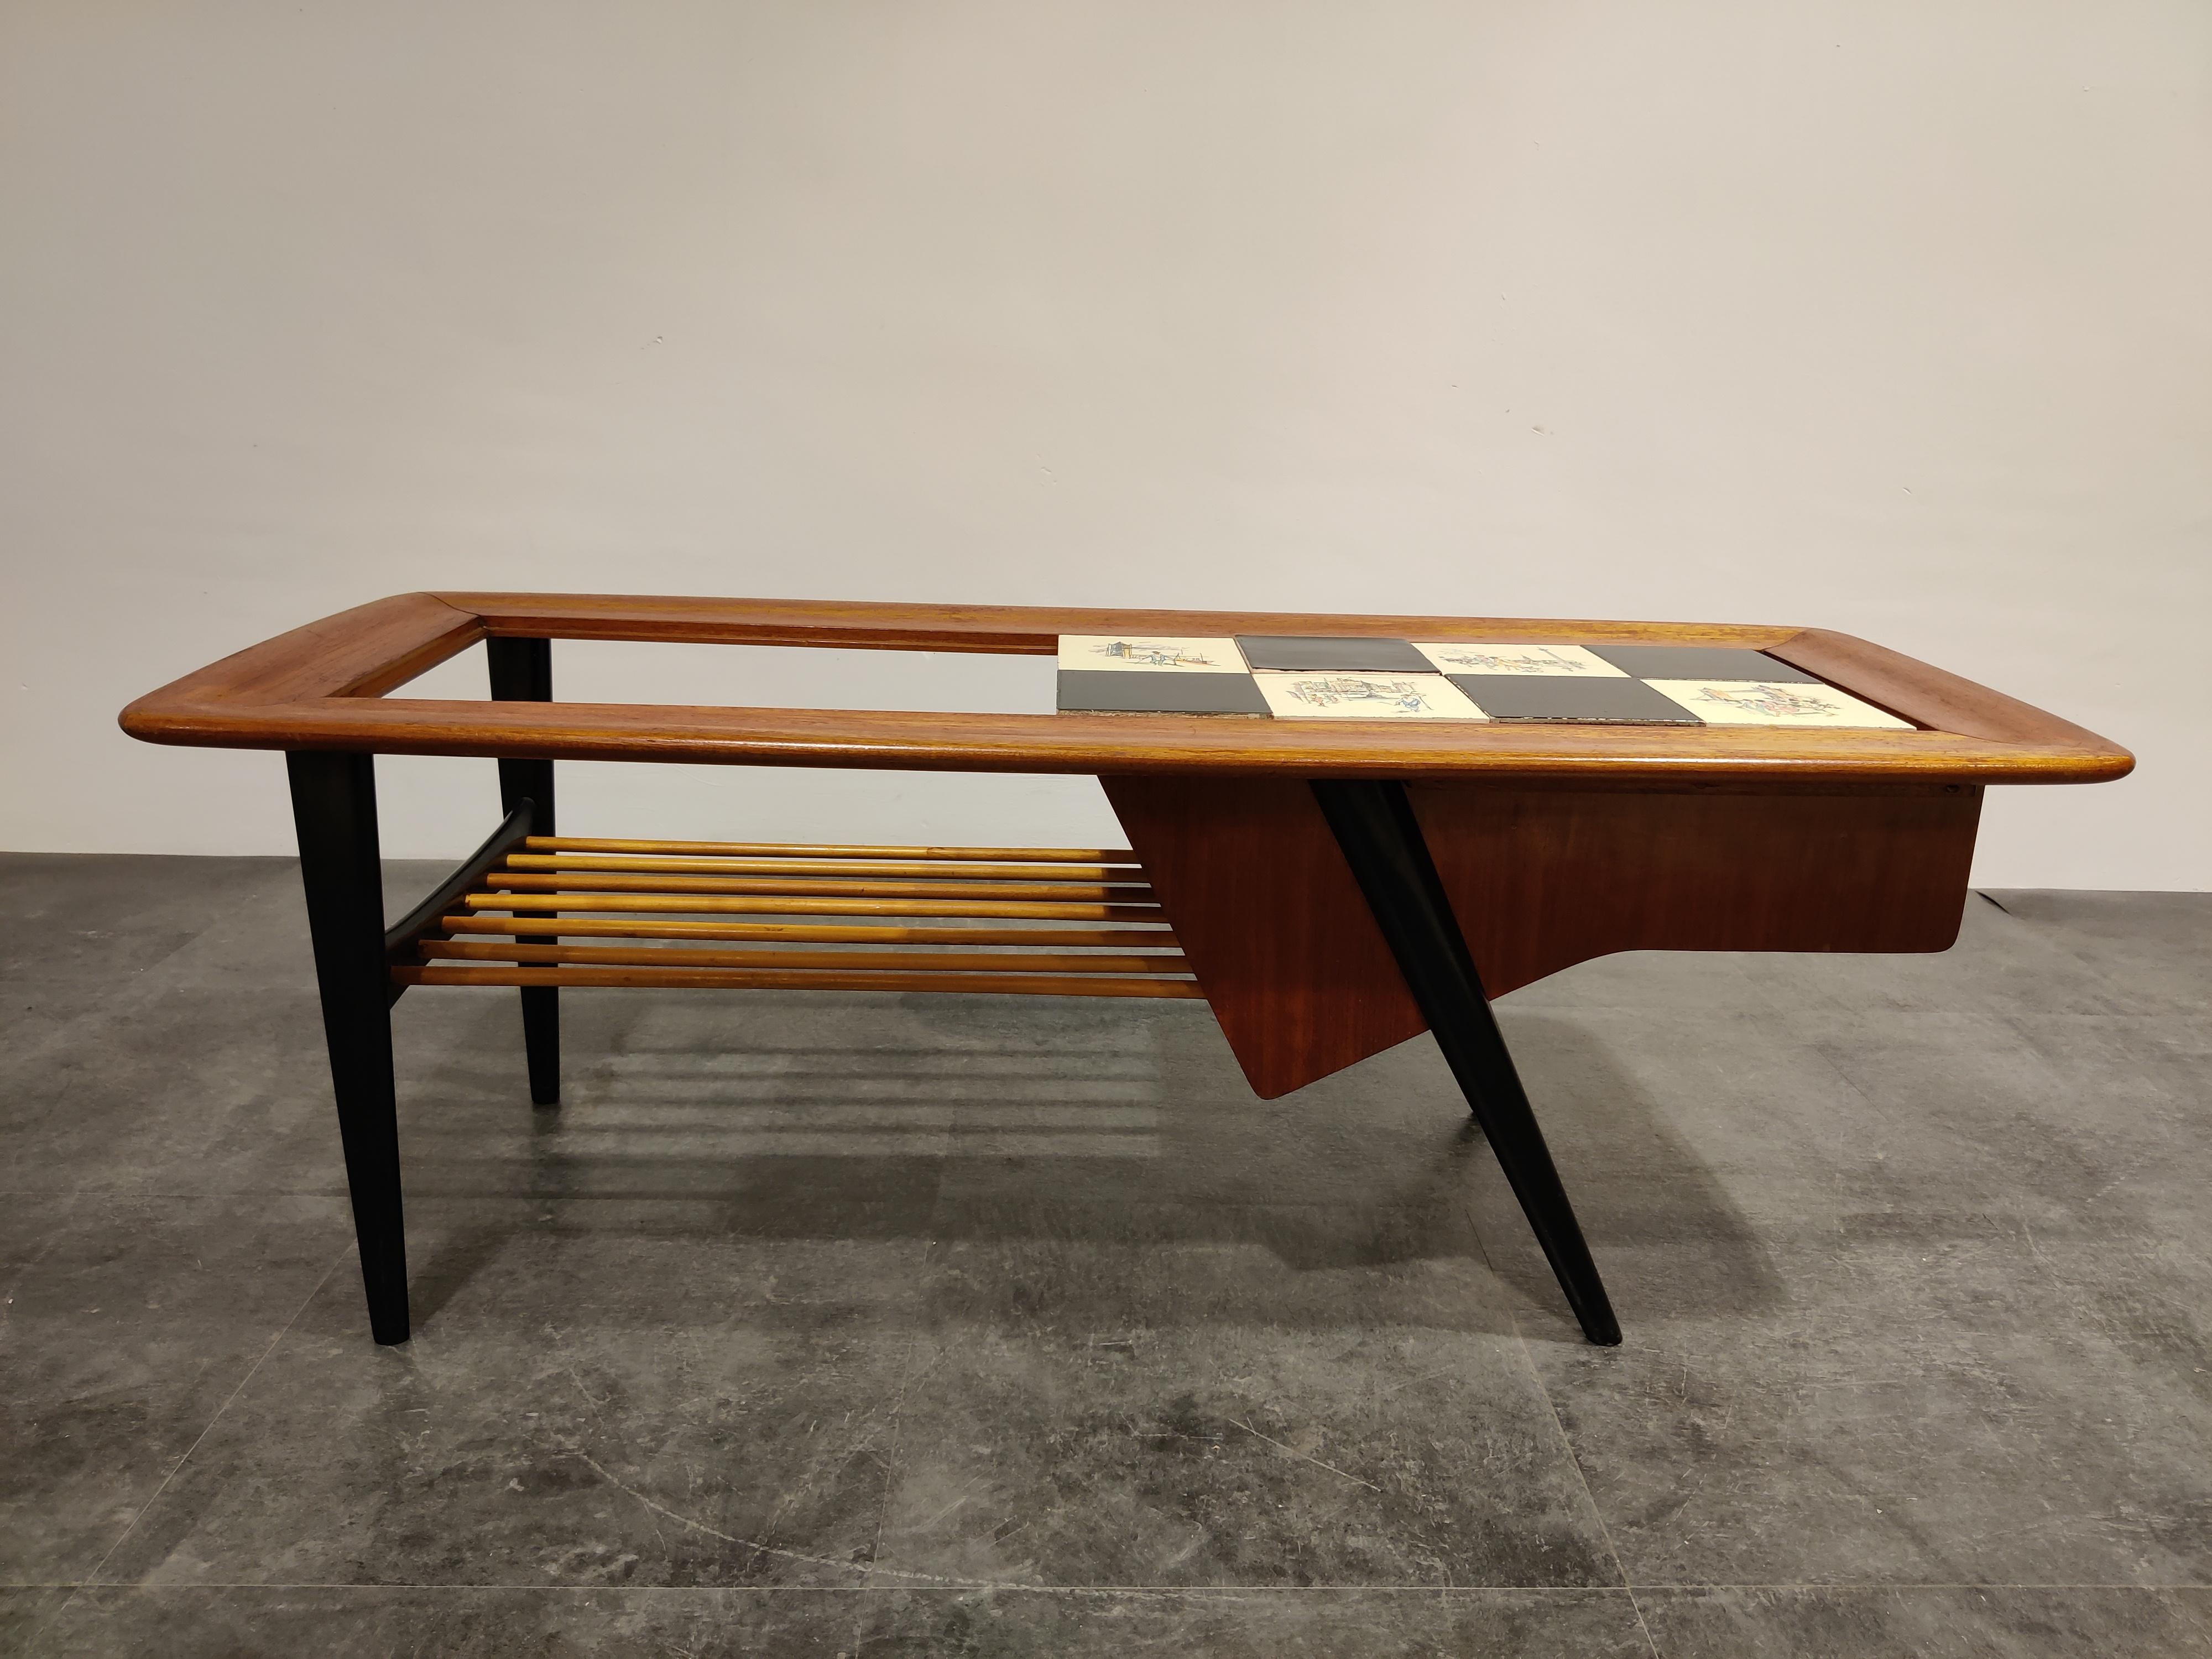 Midcentury coffee table by the Belgian designer Alfred Hendrickx.

The table features a hidden bar compartment and a moveable ceramic tyle top with drawings.

Beautifully finished wooden top and black lacquered legs.

One of our favorite